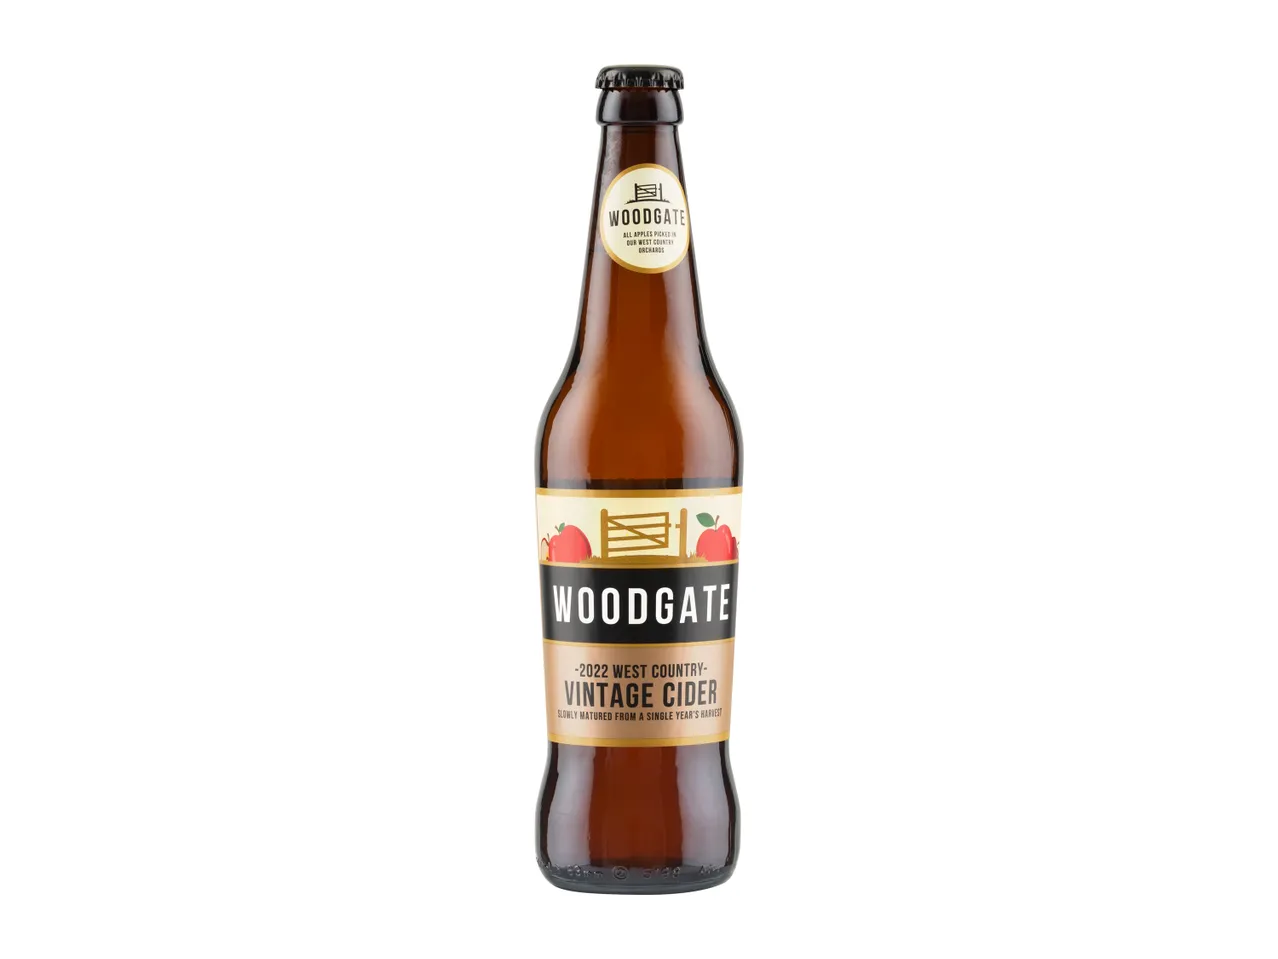 Go to full screen view: Woodgate Premium West Country Vintage Cider - Image 1